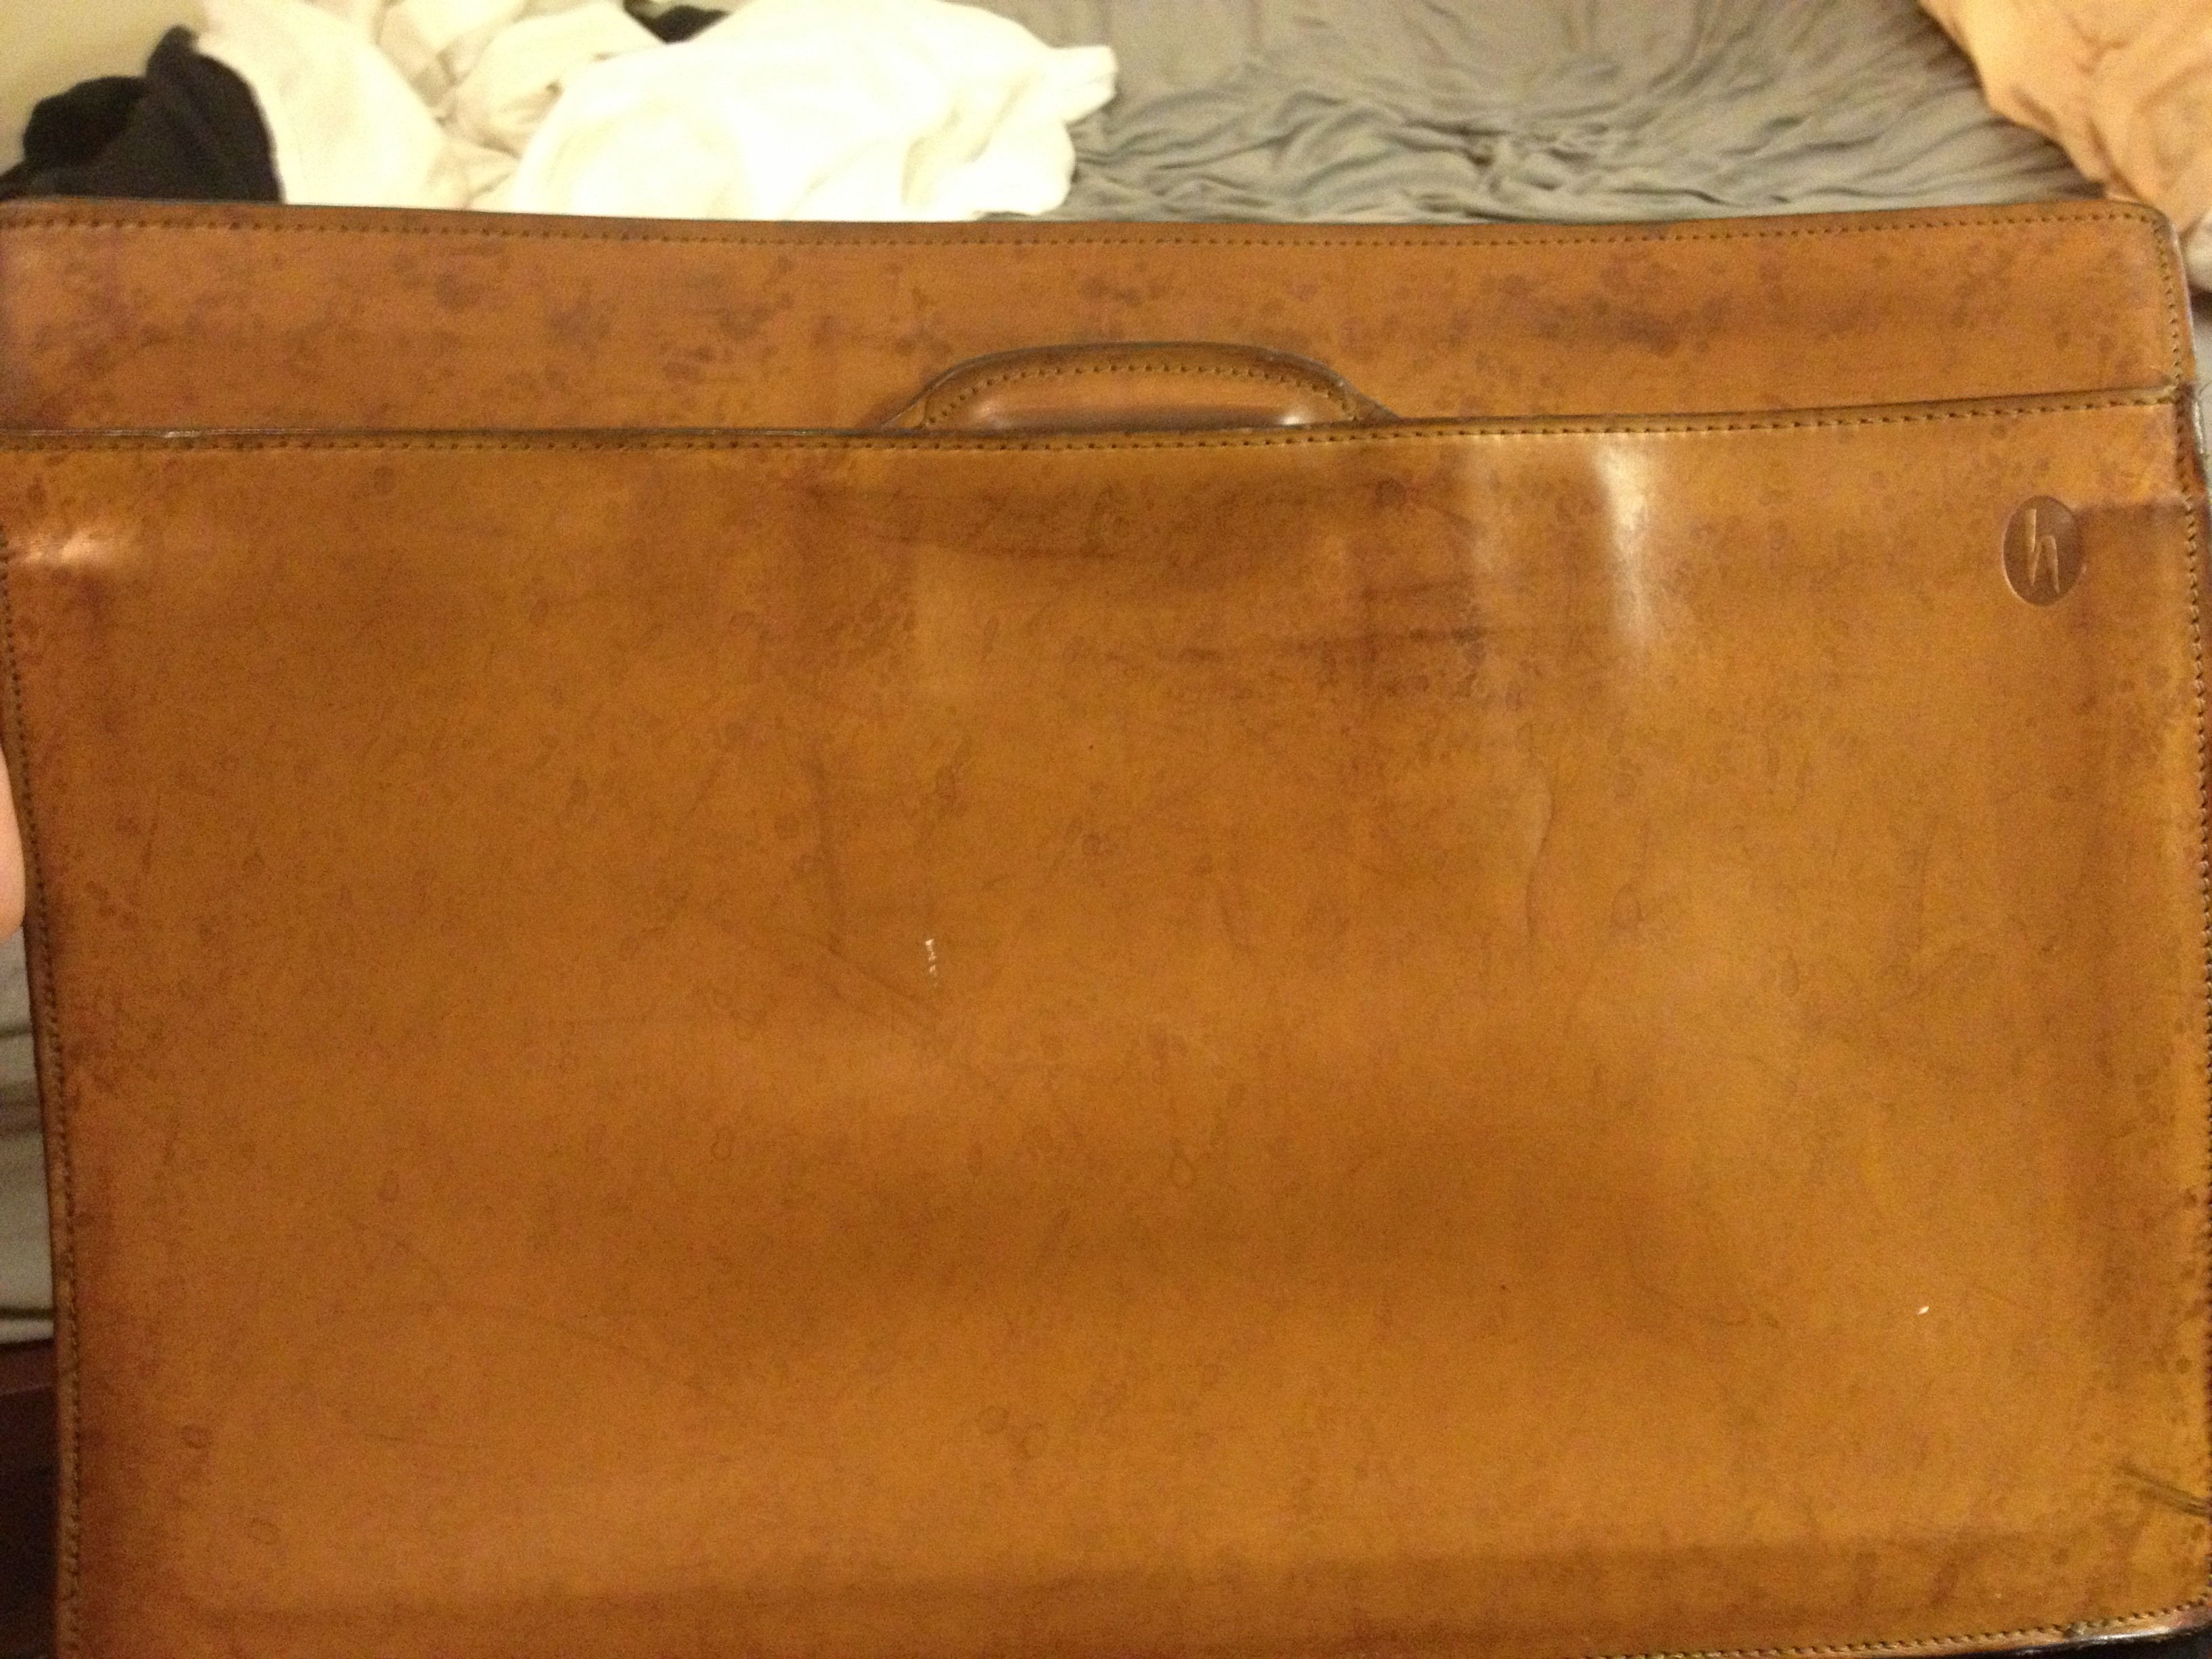 Hartmann Leather Briefcase, Review and Questions | Styleforum